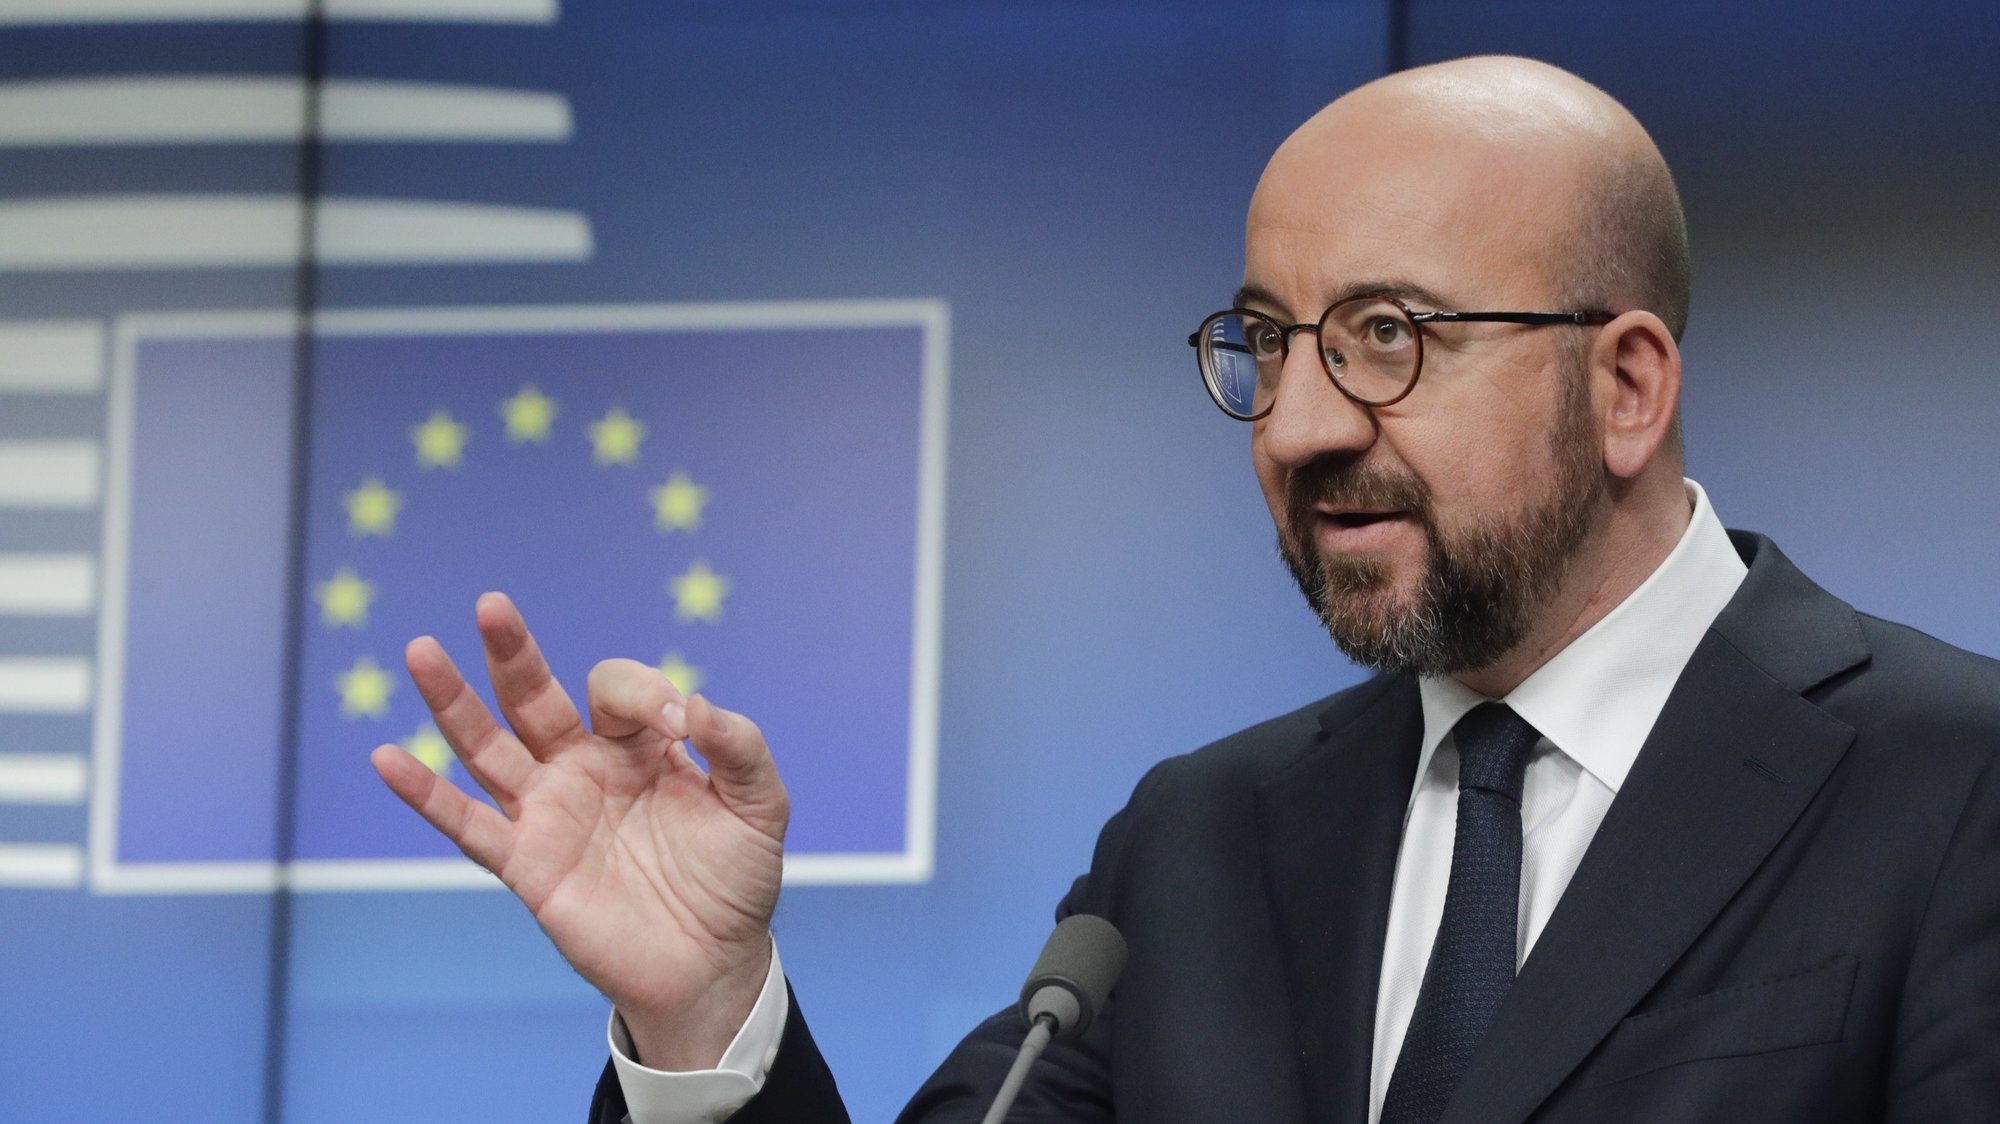 epa09849637 European Council President Charles Michel gives a press conference at the end of a two day European Council Summit in Brussels, Belgium, 25 March 2022.  EPA/OLIVIER HOSLET